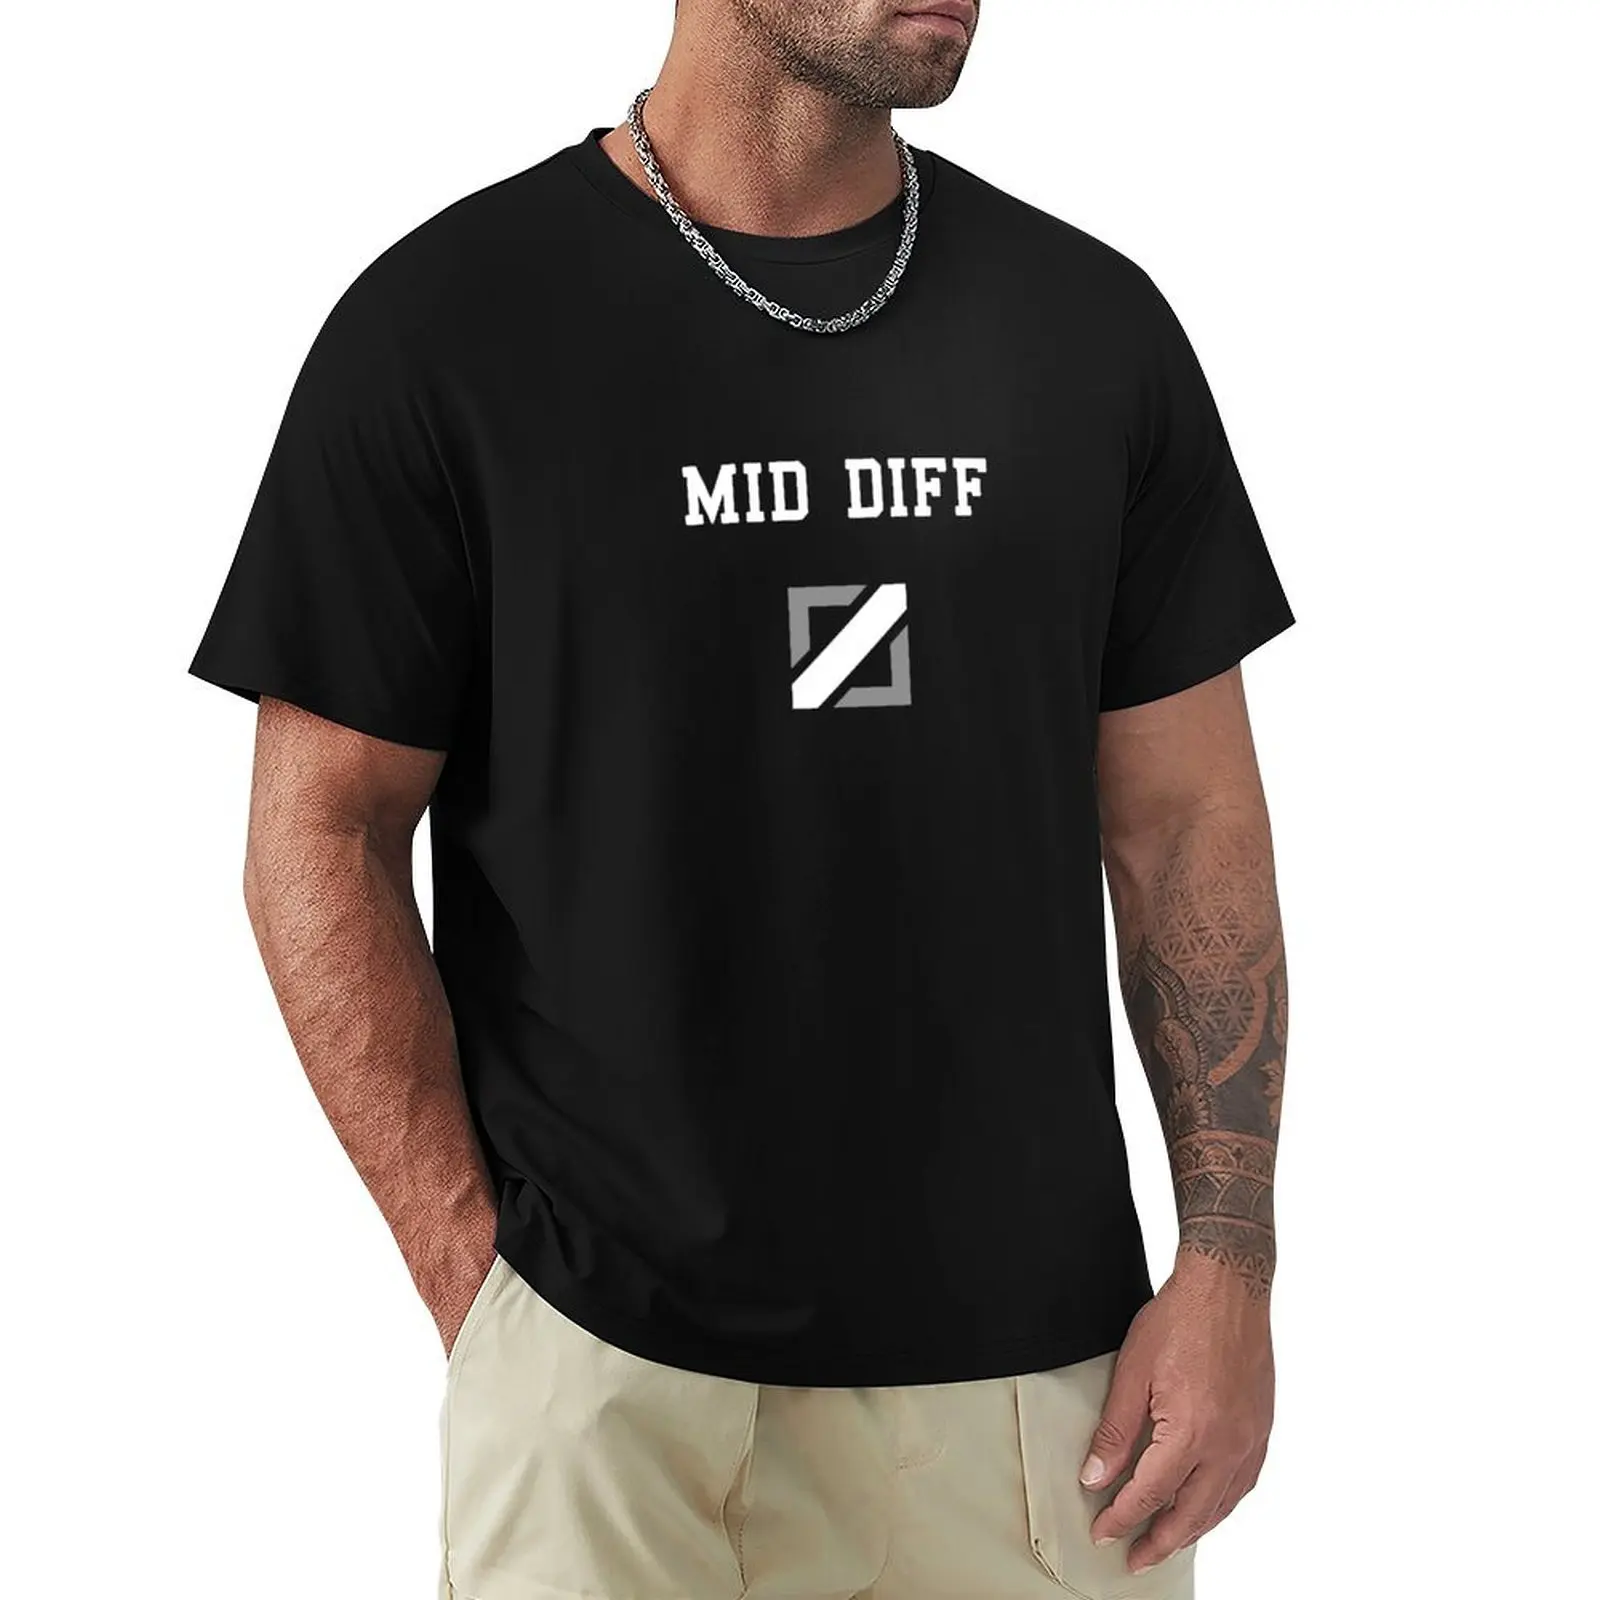 

MID DIFFERENCE MID DIFF MIDDLE DIFF GAP T-Shirt sports fans cute tops new edition Short sleeve tee men